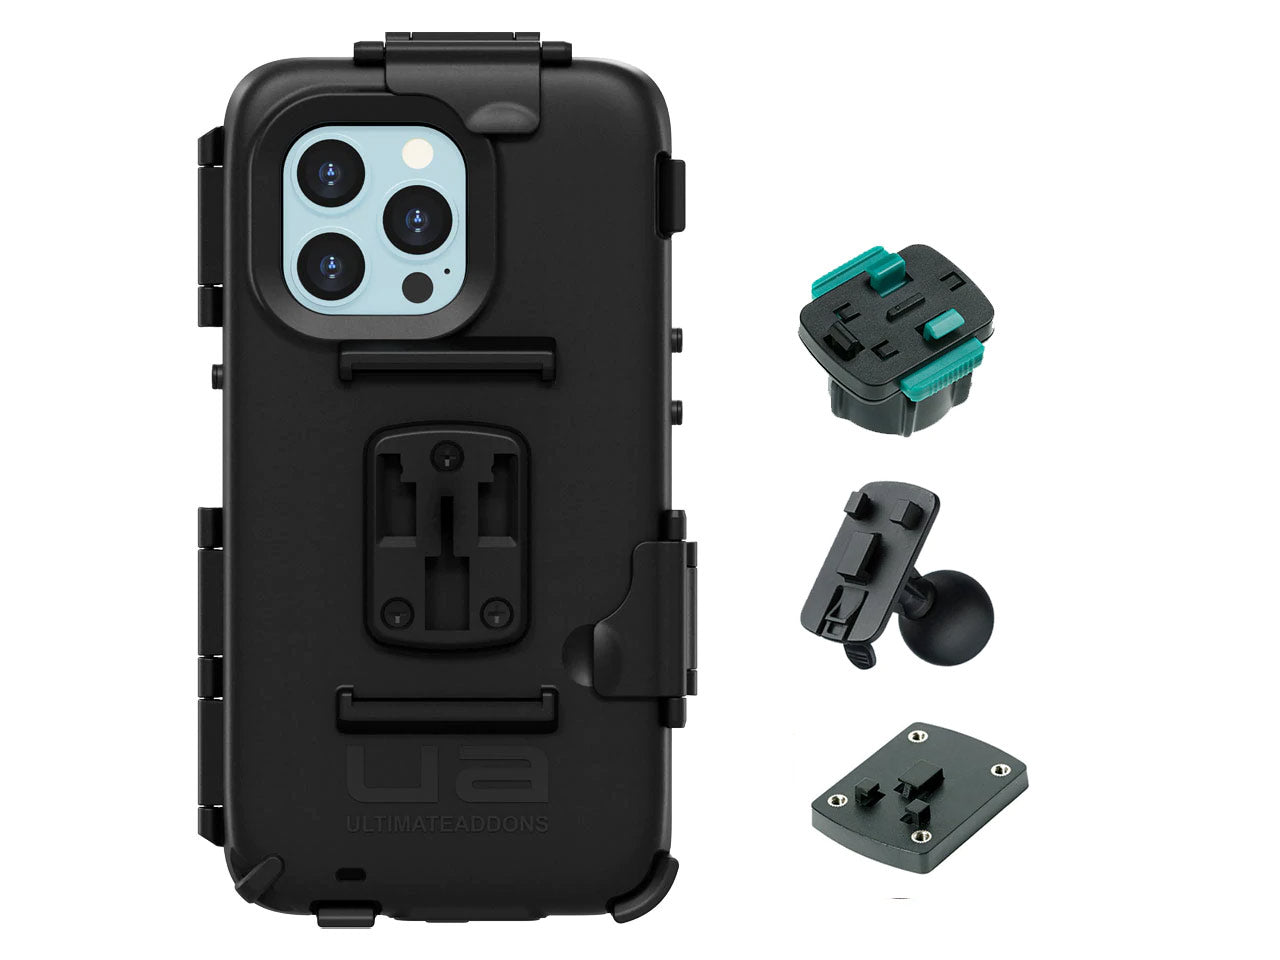 Ultimateaddons Tough Waterproof Case Motorcycle System